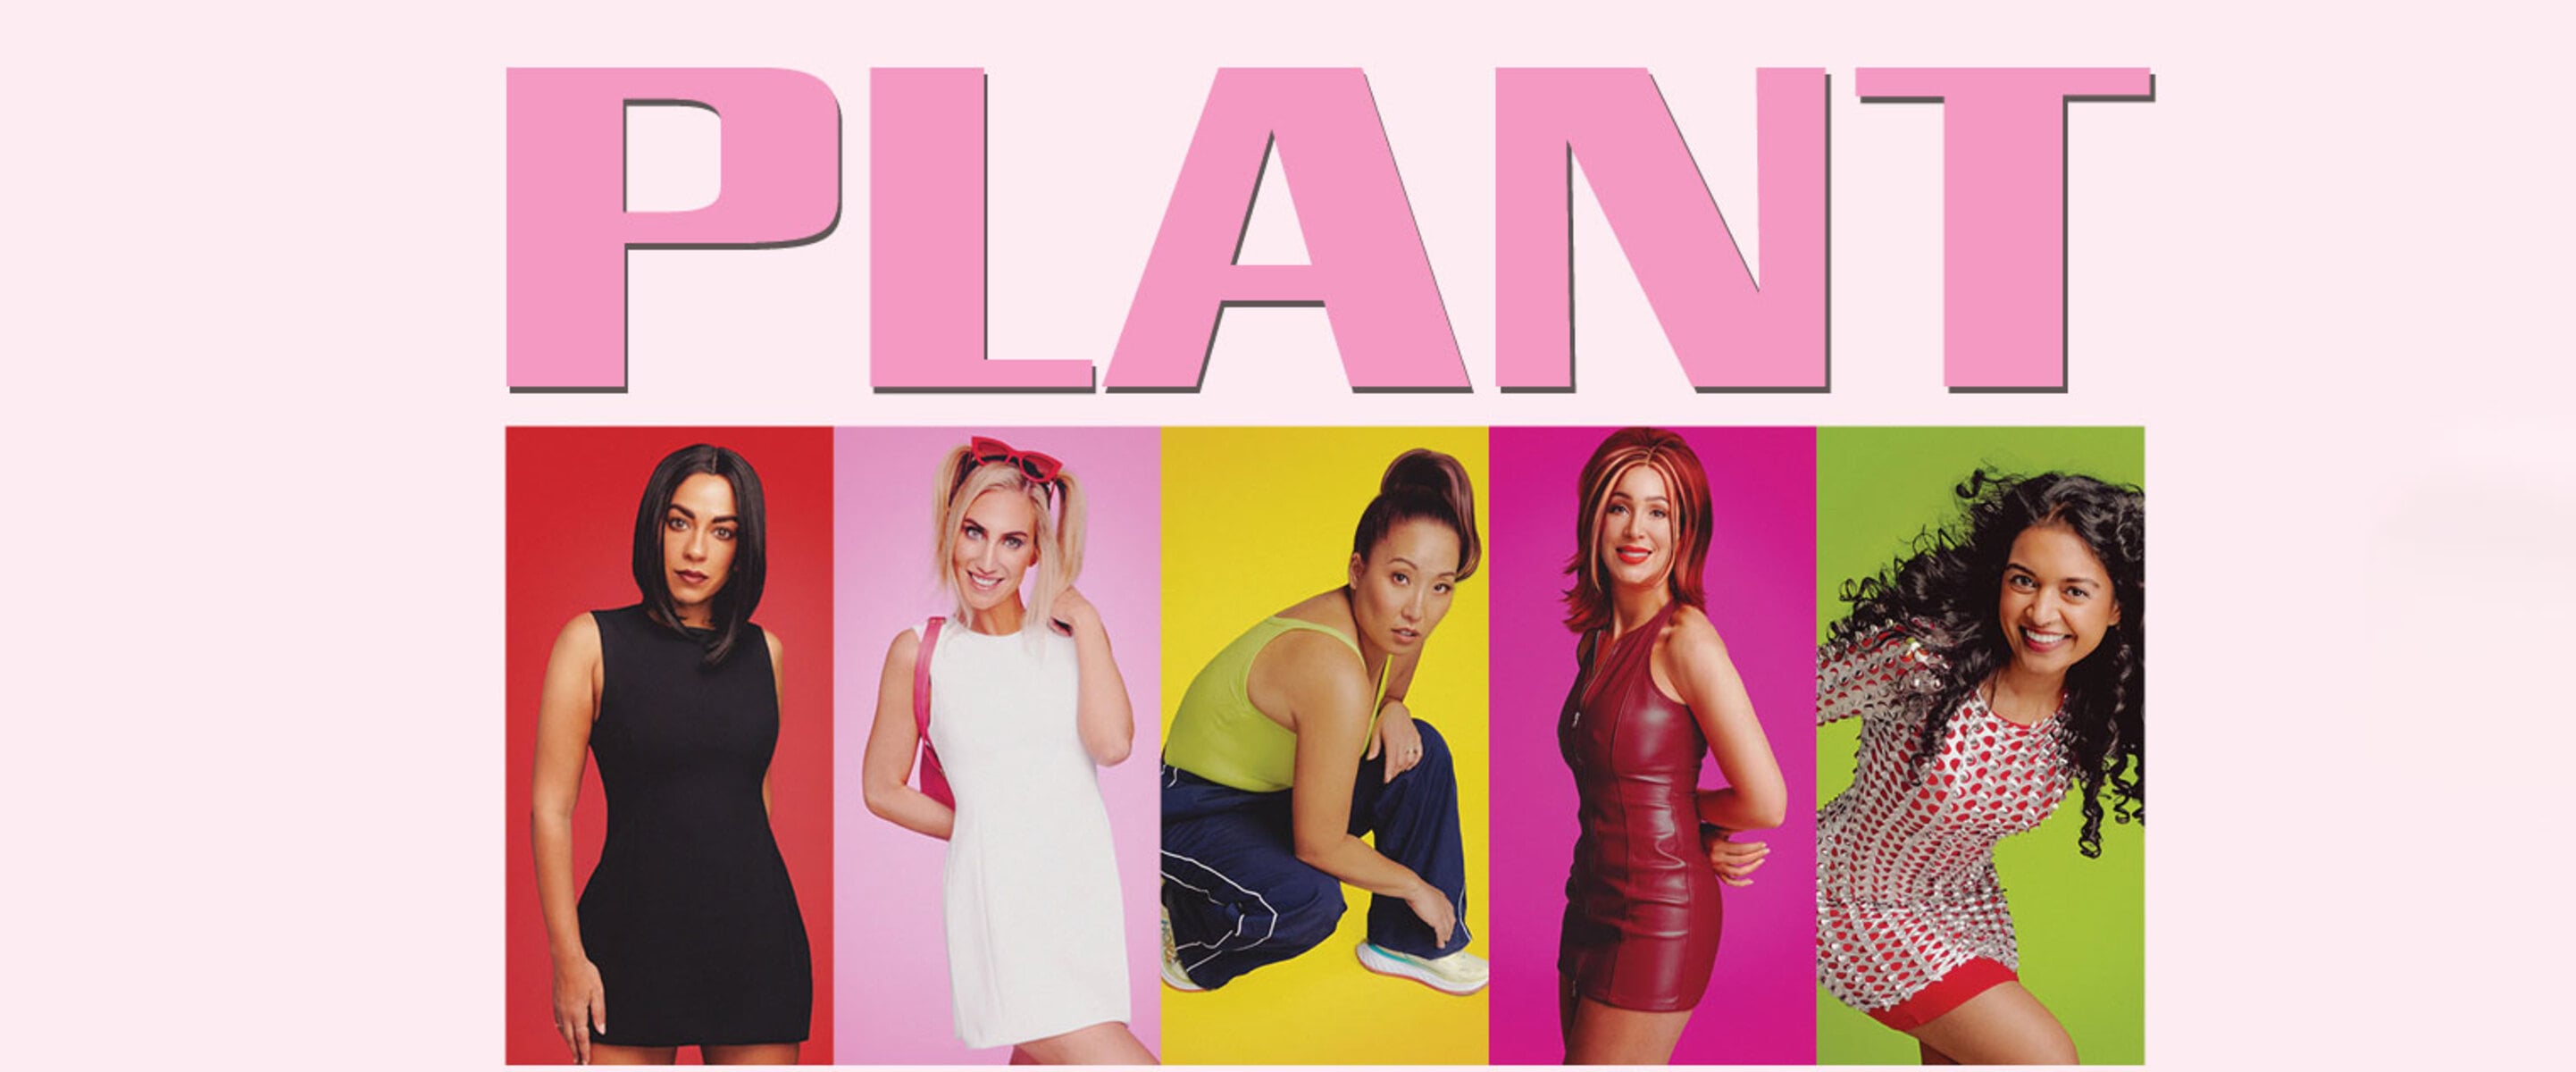 "Wannabe" a Spice Girl? The ‘90s Girl Power Icons Just Got a Vegan Makeover&nbsp;&nbsp;